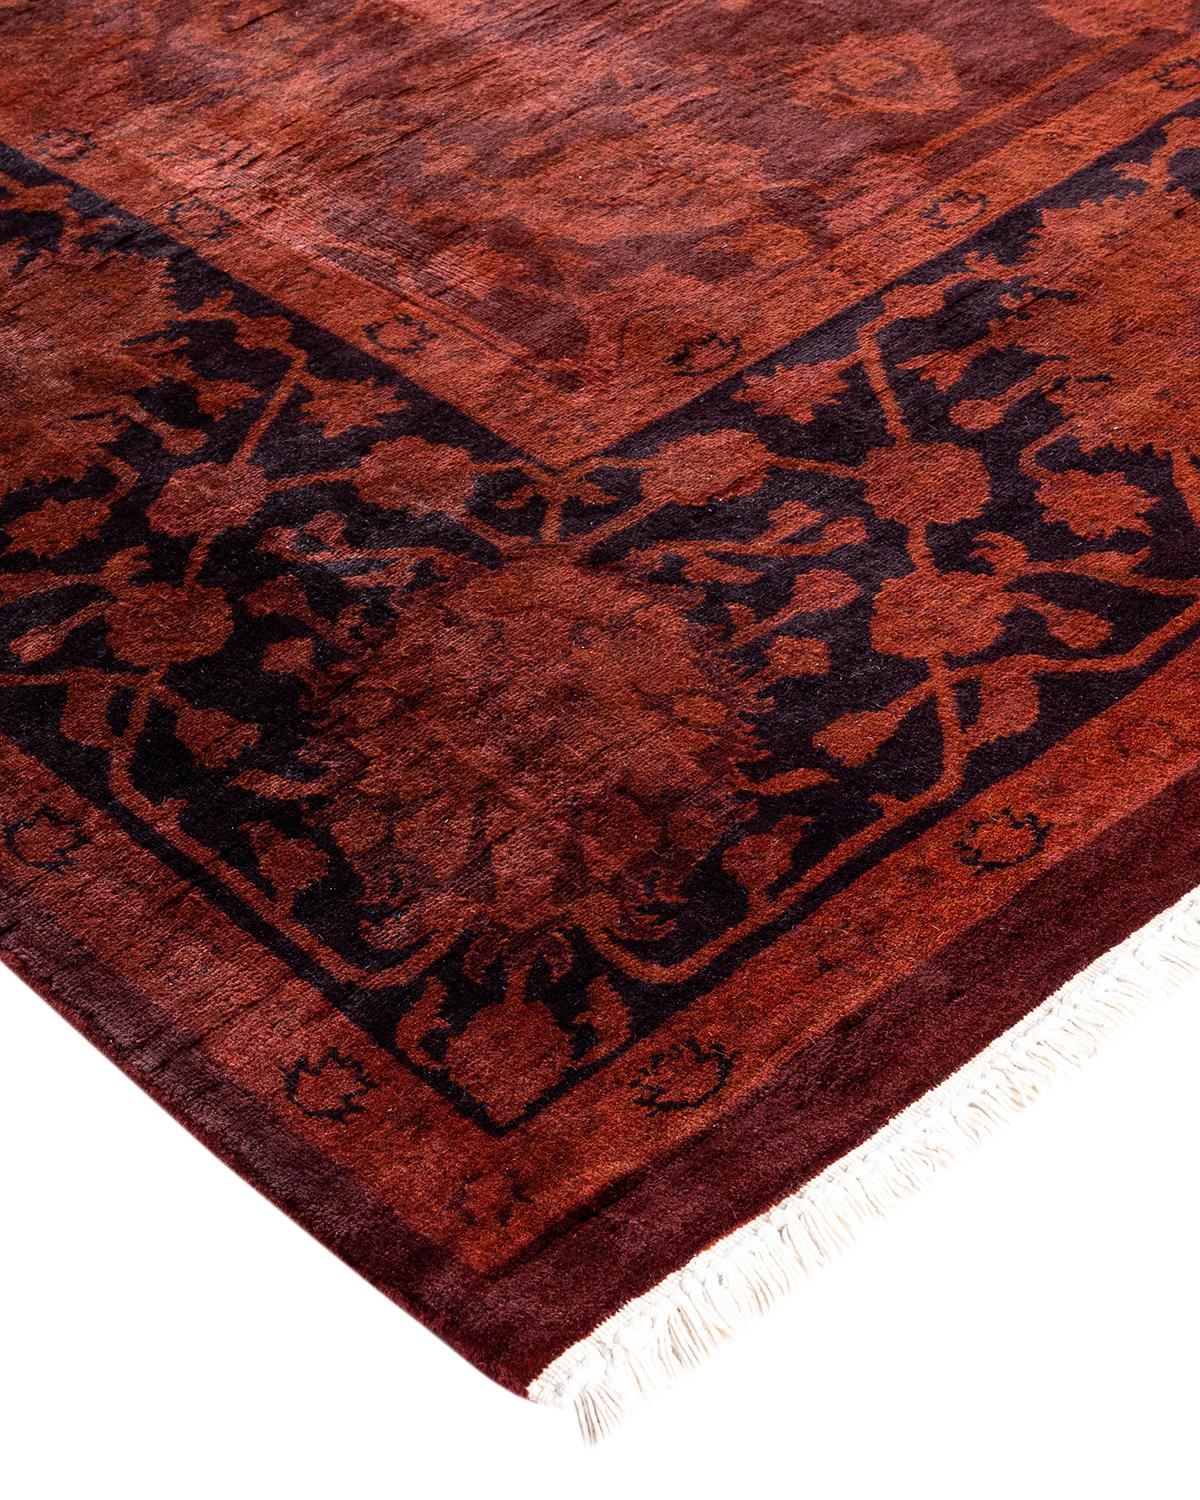 Vibrance rugs epitomize classic with a twist: traditional patterns overdyed in brilliant color. Each hand-knotted rug is washed in a 100%-natural botanical dye that reveals hidden nuances in the designs. These are rugs that transcend trends, and